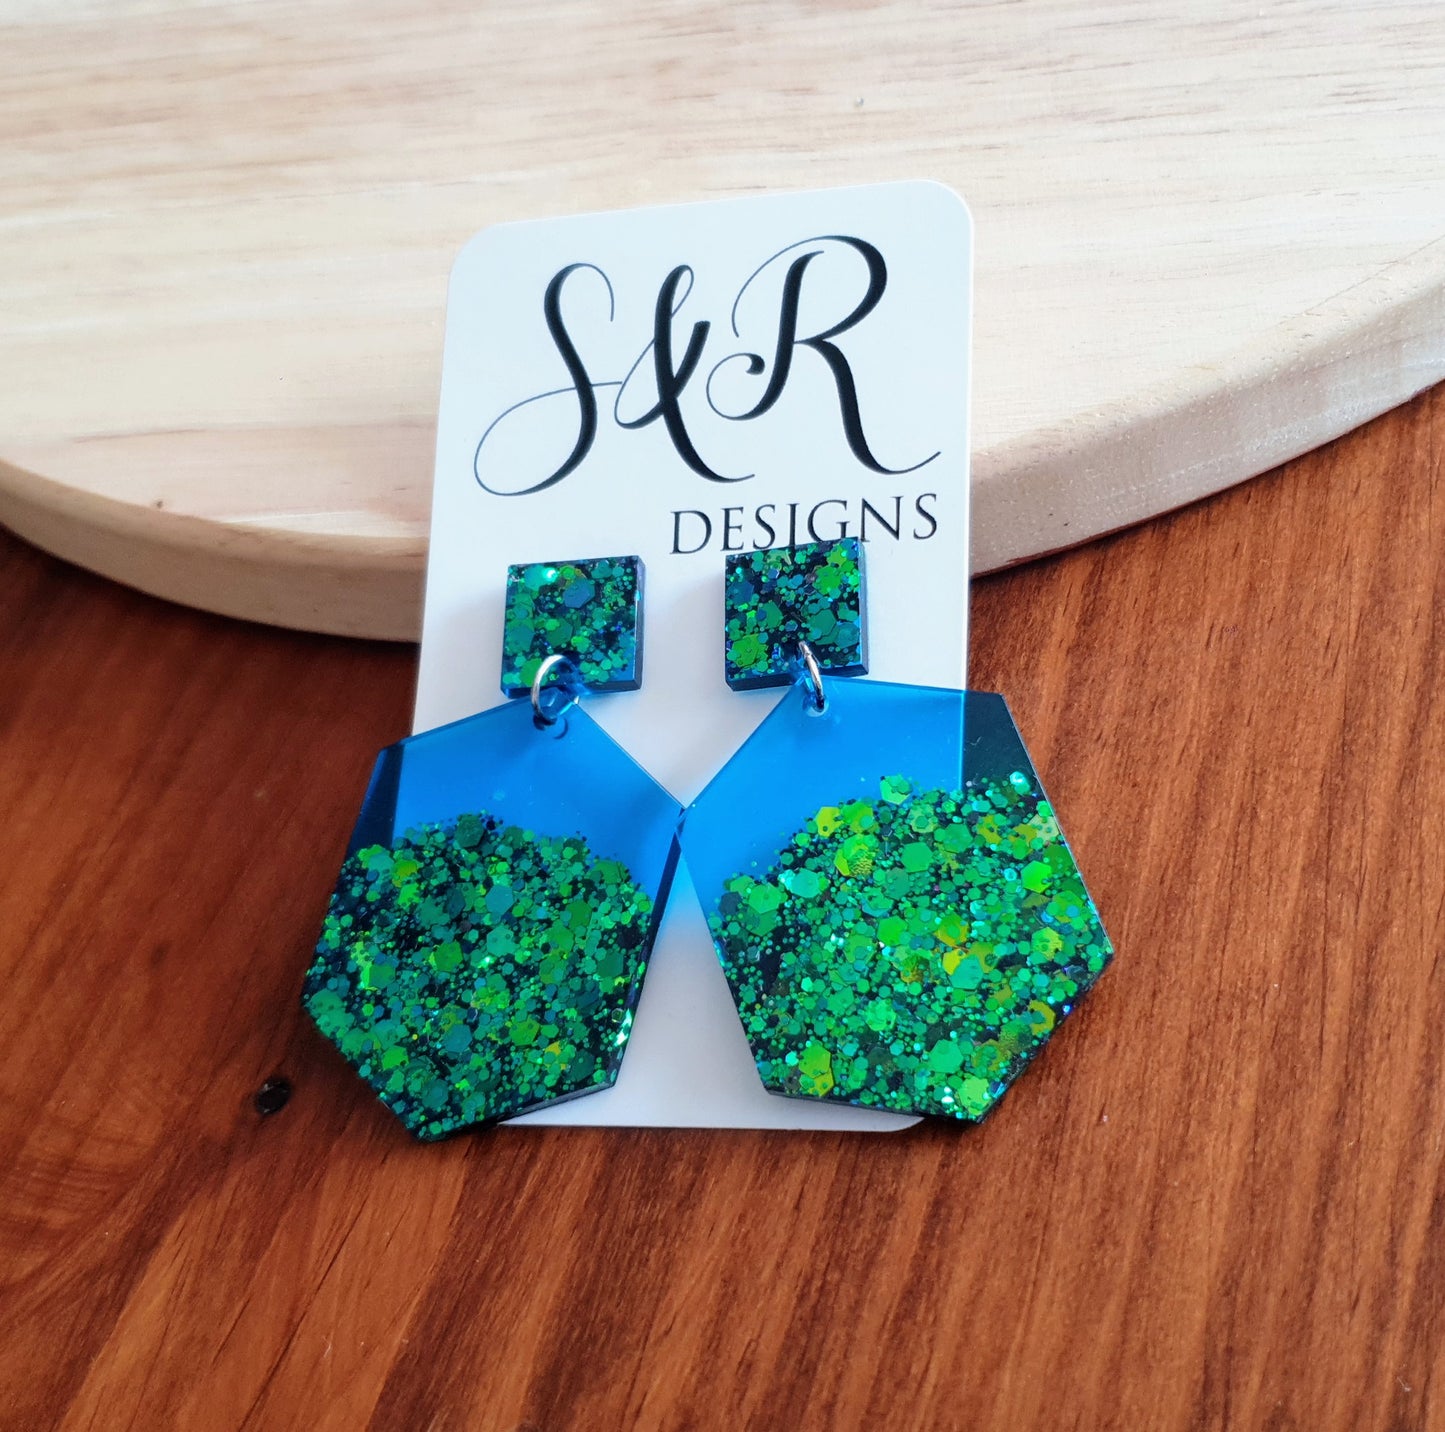 Brilliant Blue Hexagon Drop Earrings.  Handmade Resin Earrings with Chameleon Blue and Green Dangle Earrings with Stainless Steel